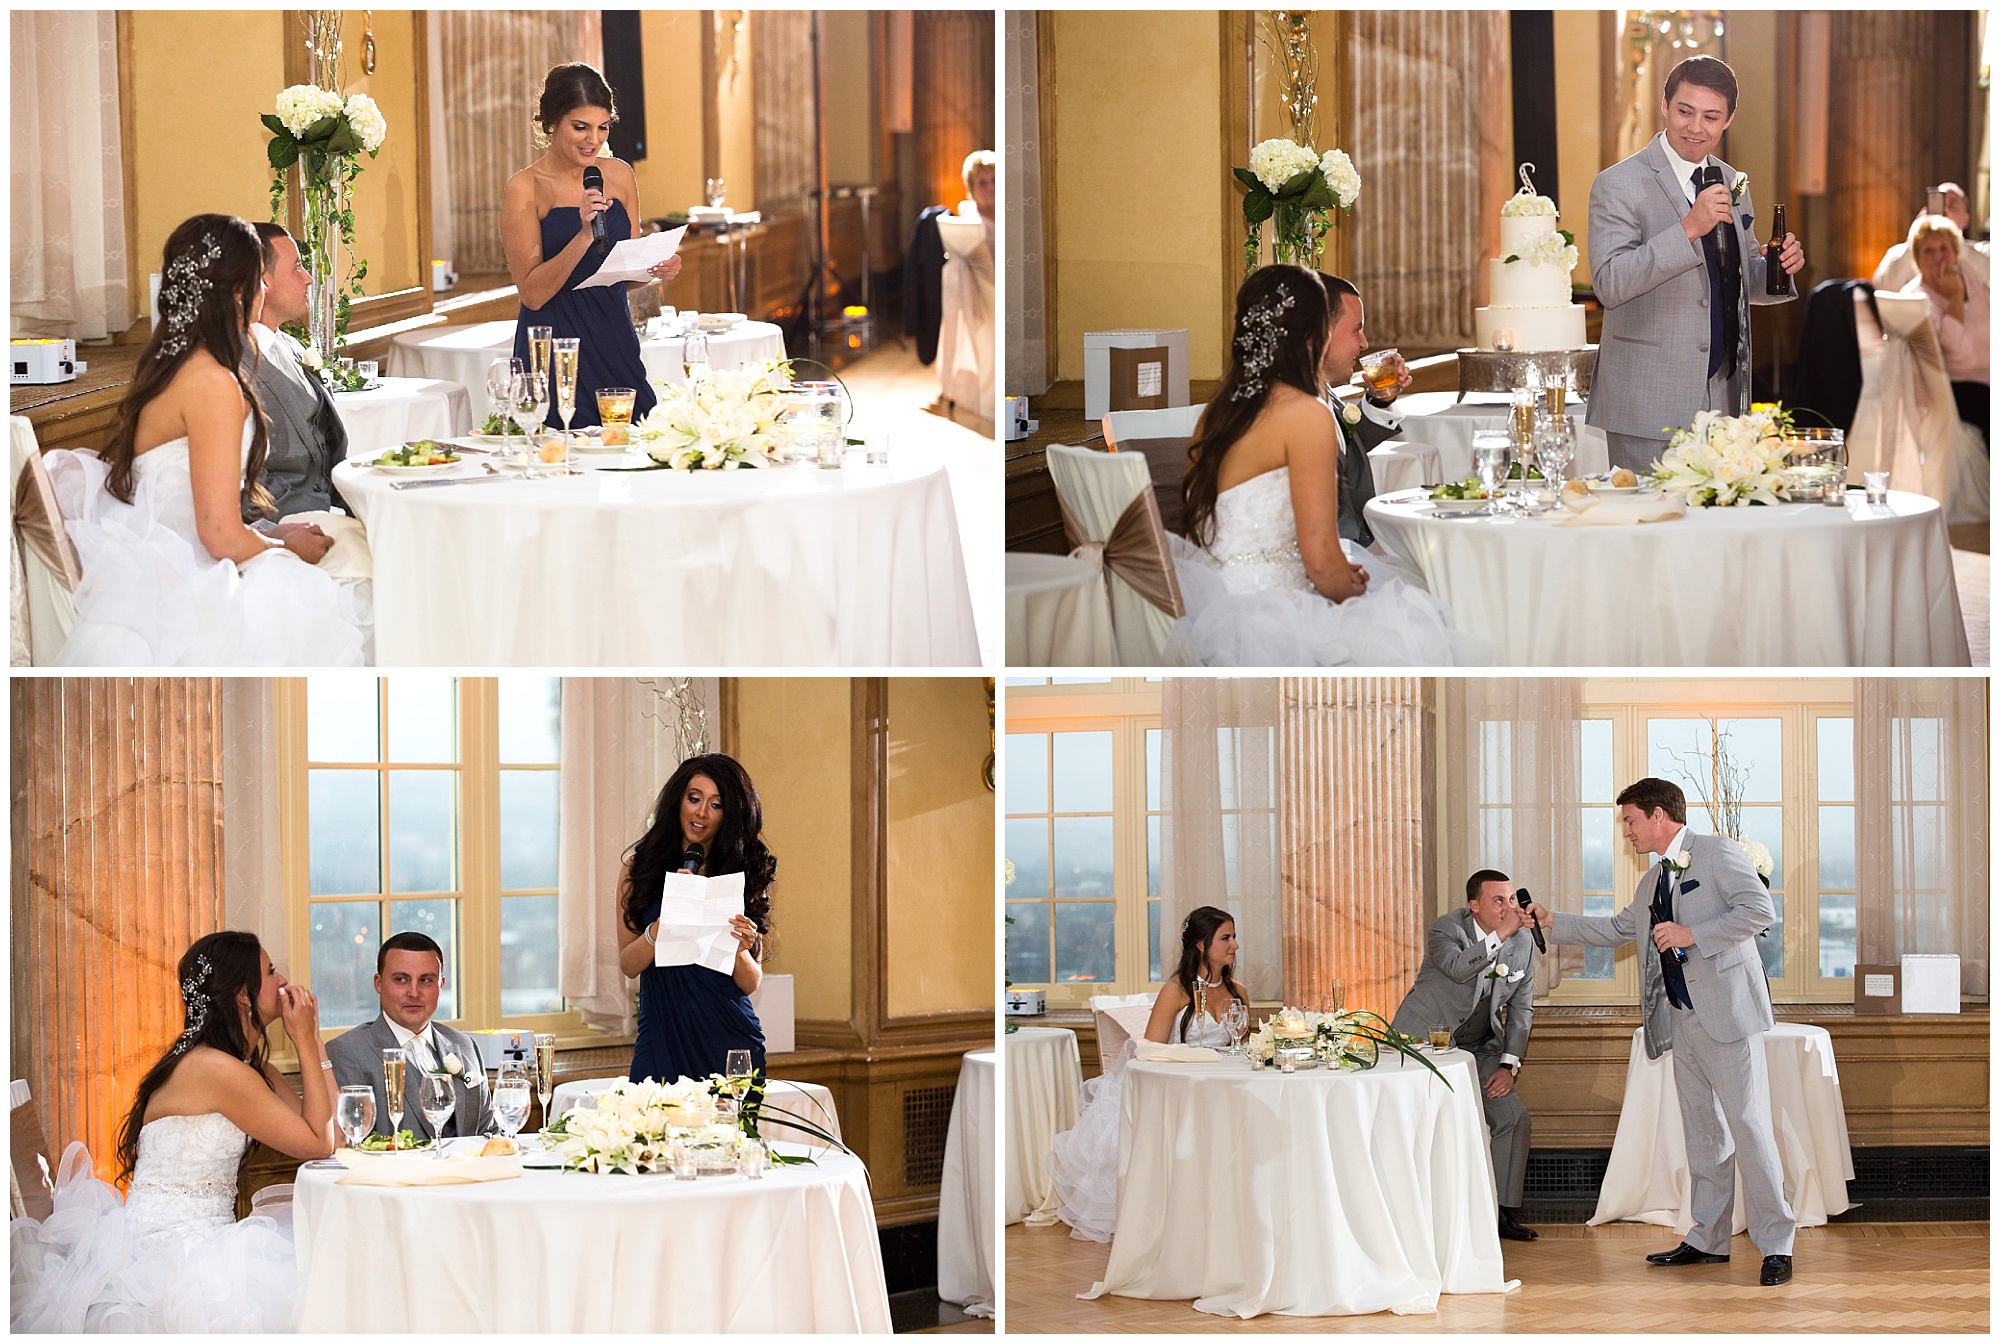 Photos of the maid of honor and best man giving their speeches and toast the bride and groom.